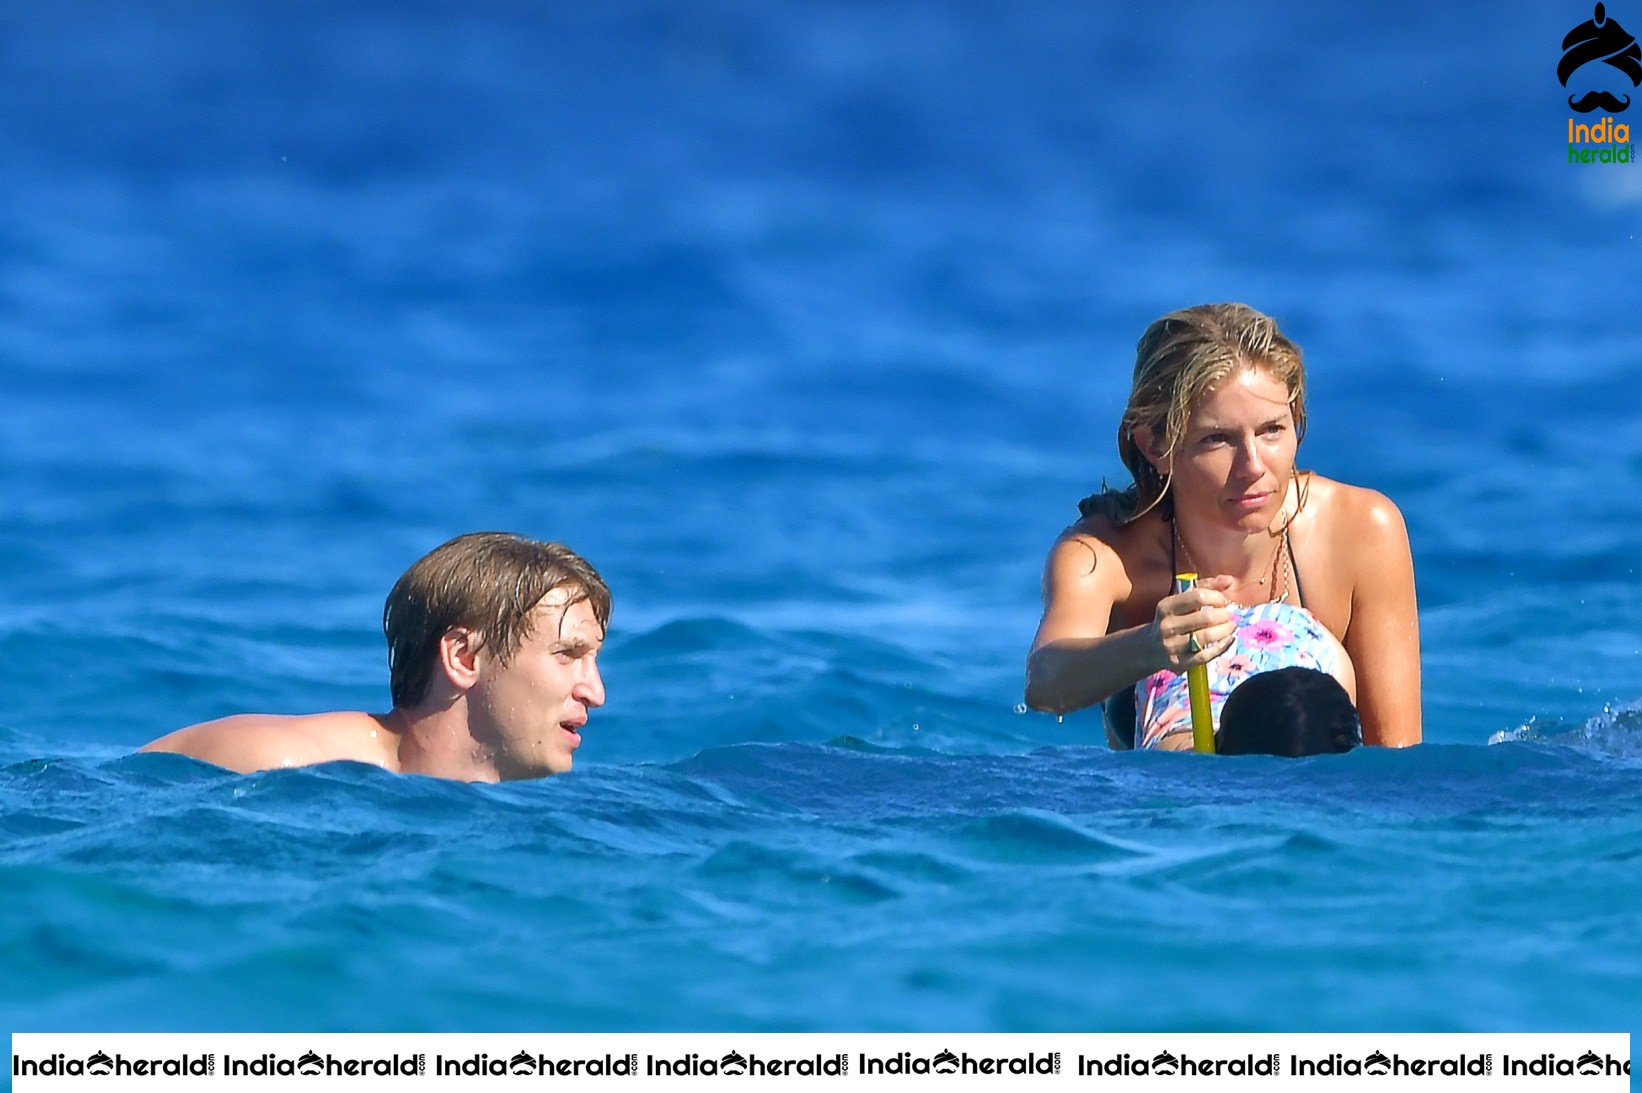 Sienna Miller caught in Bikini as she enjoys on a boat at St Tropez Set 2